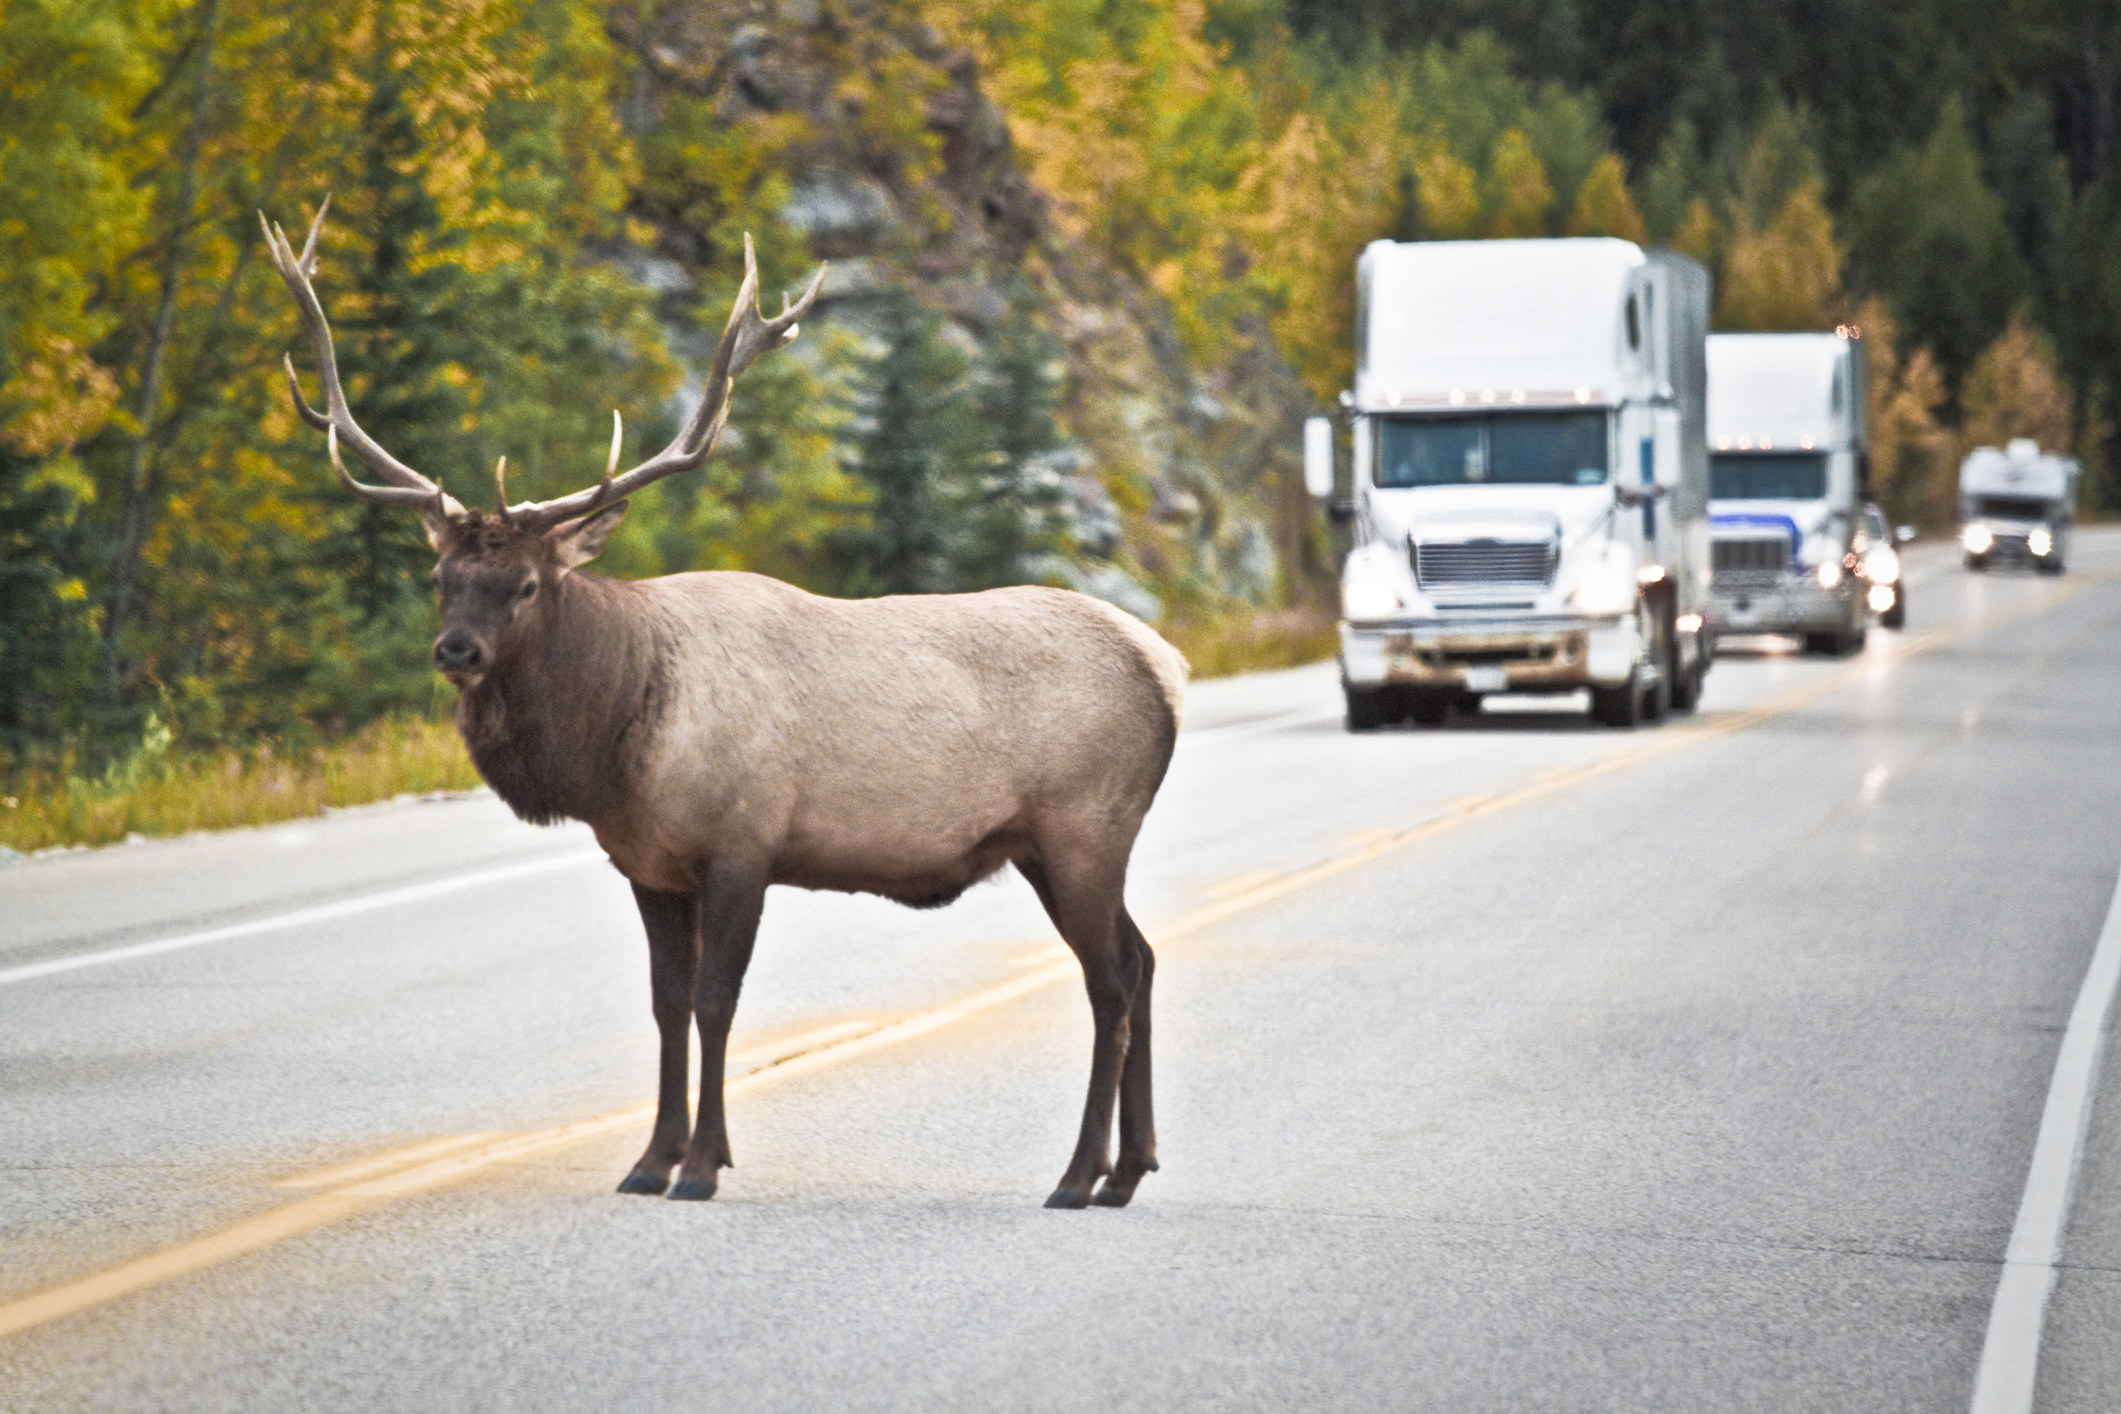 Elk standing in the middle of a road